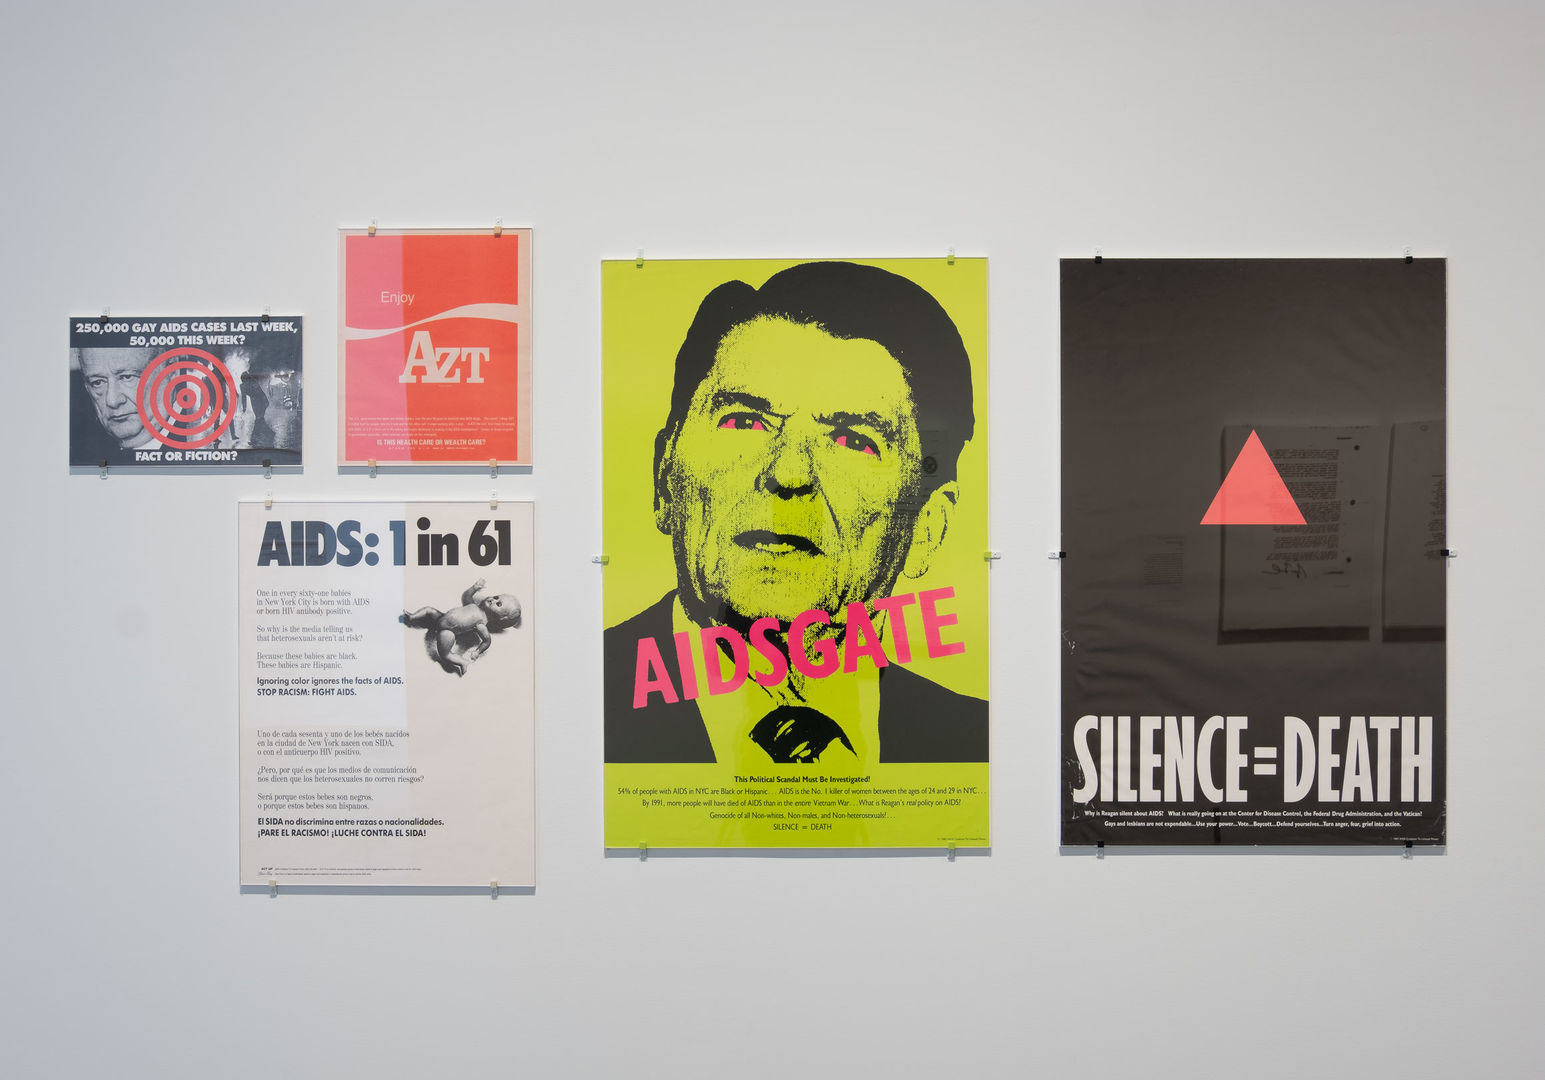 View of an gallery wall at The Met Breuer displaying five protest posters by Gran Fury and the Silence = Death Project created during the early days of the AIDS epidemic